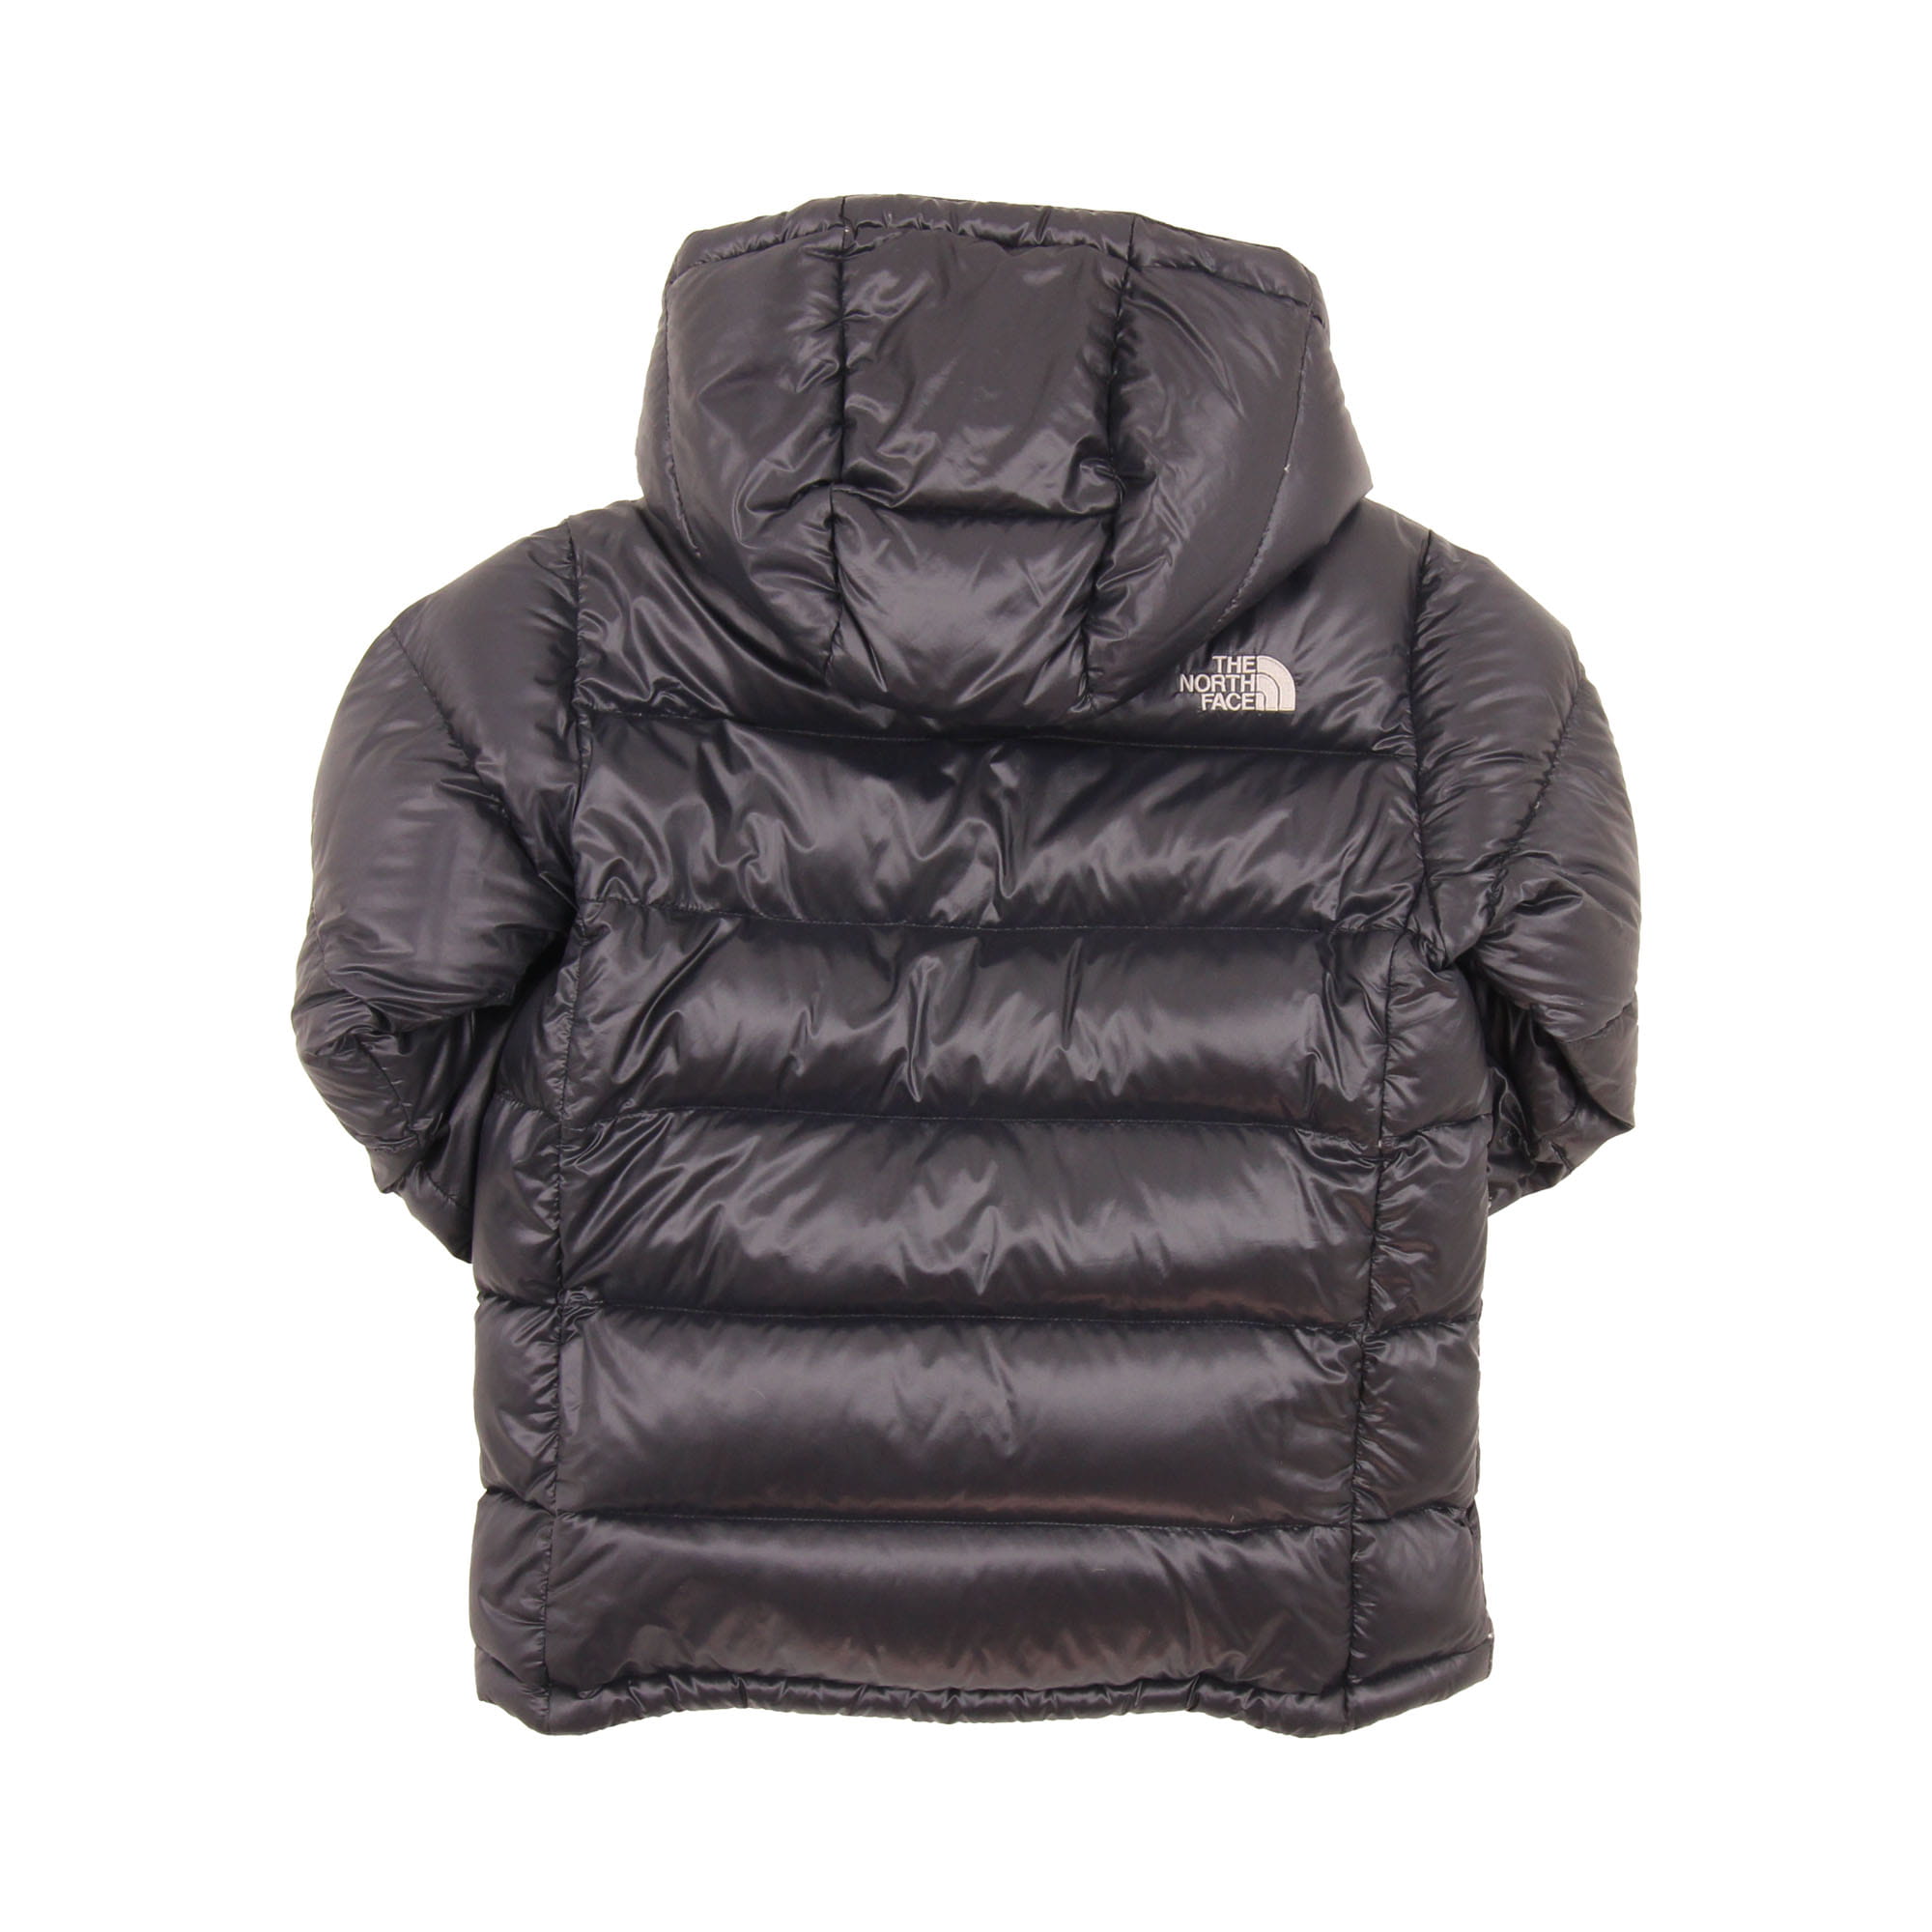 The North Face 700 Puffer Jacket -  XS/S